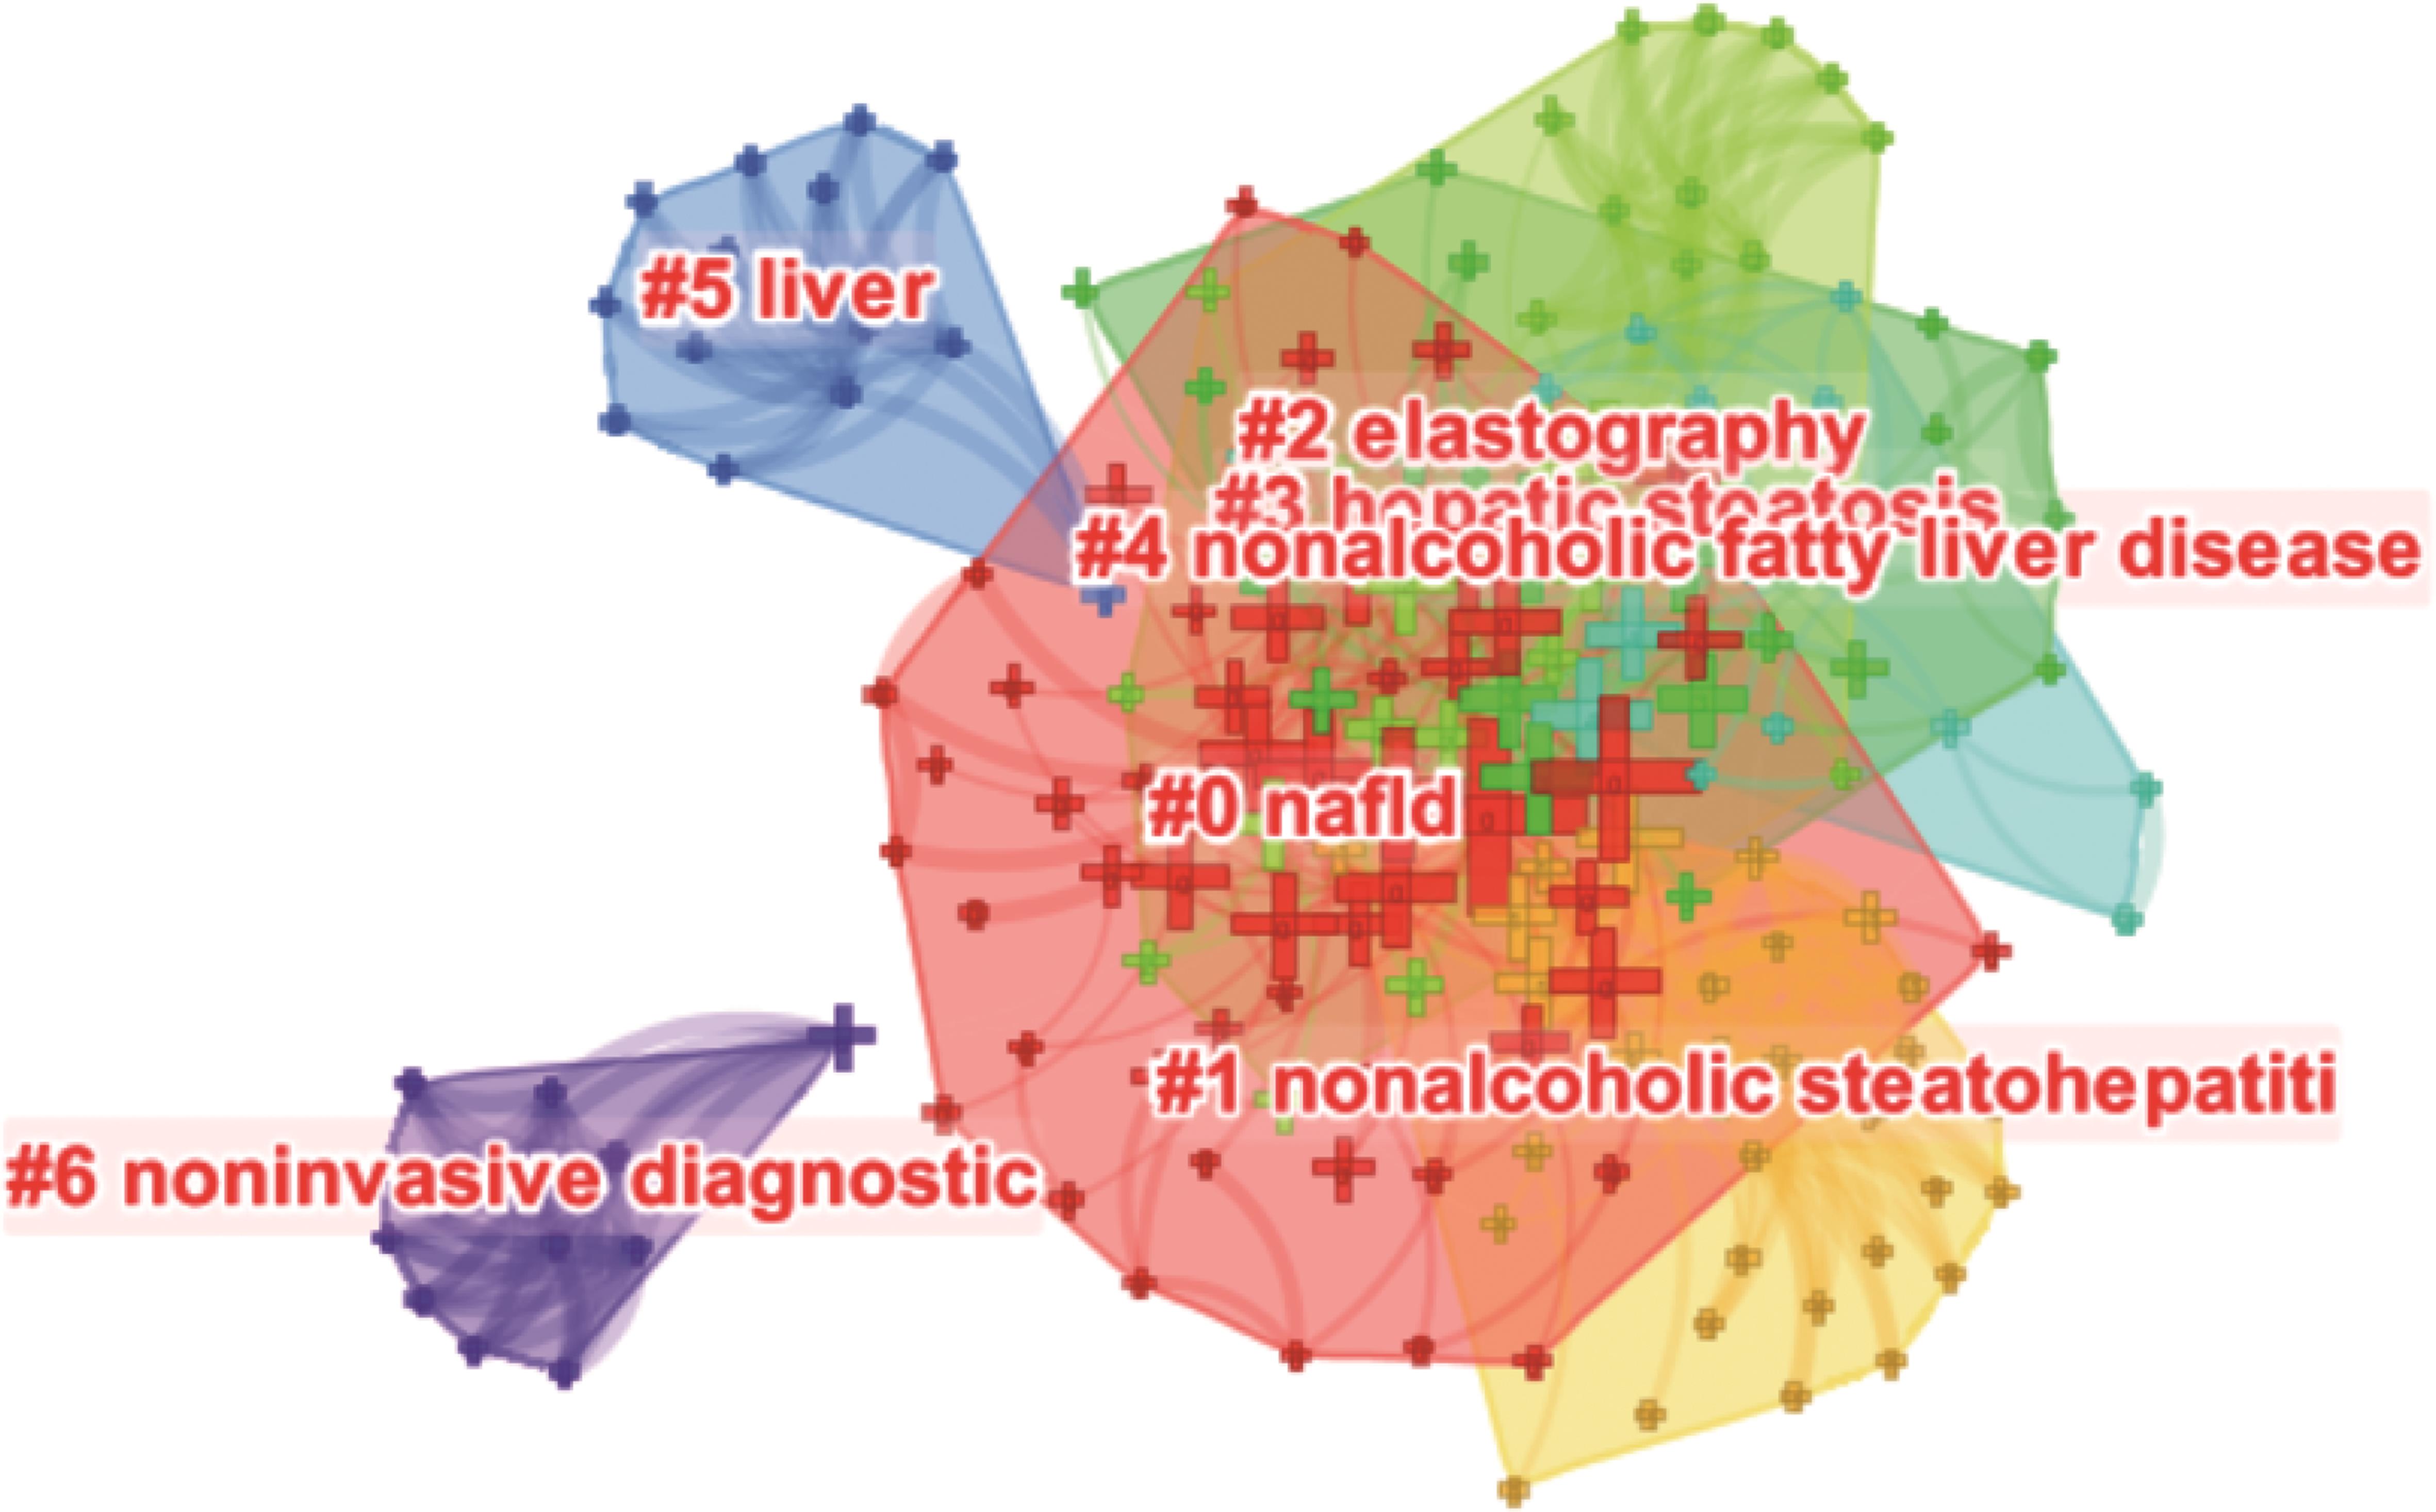 Keyword clustering. Through cluster analysis, seven clusters were obtained, including NAFLD, nonalcoholic steatohepatitis, elastography, hepatic steatosis, nonalcoholic fatty liver disease, liver, and noninvasive diagnostic.